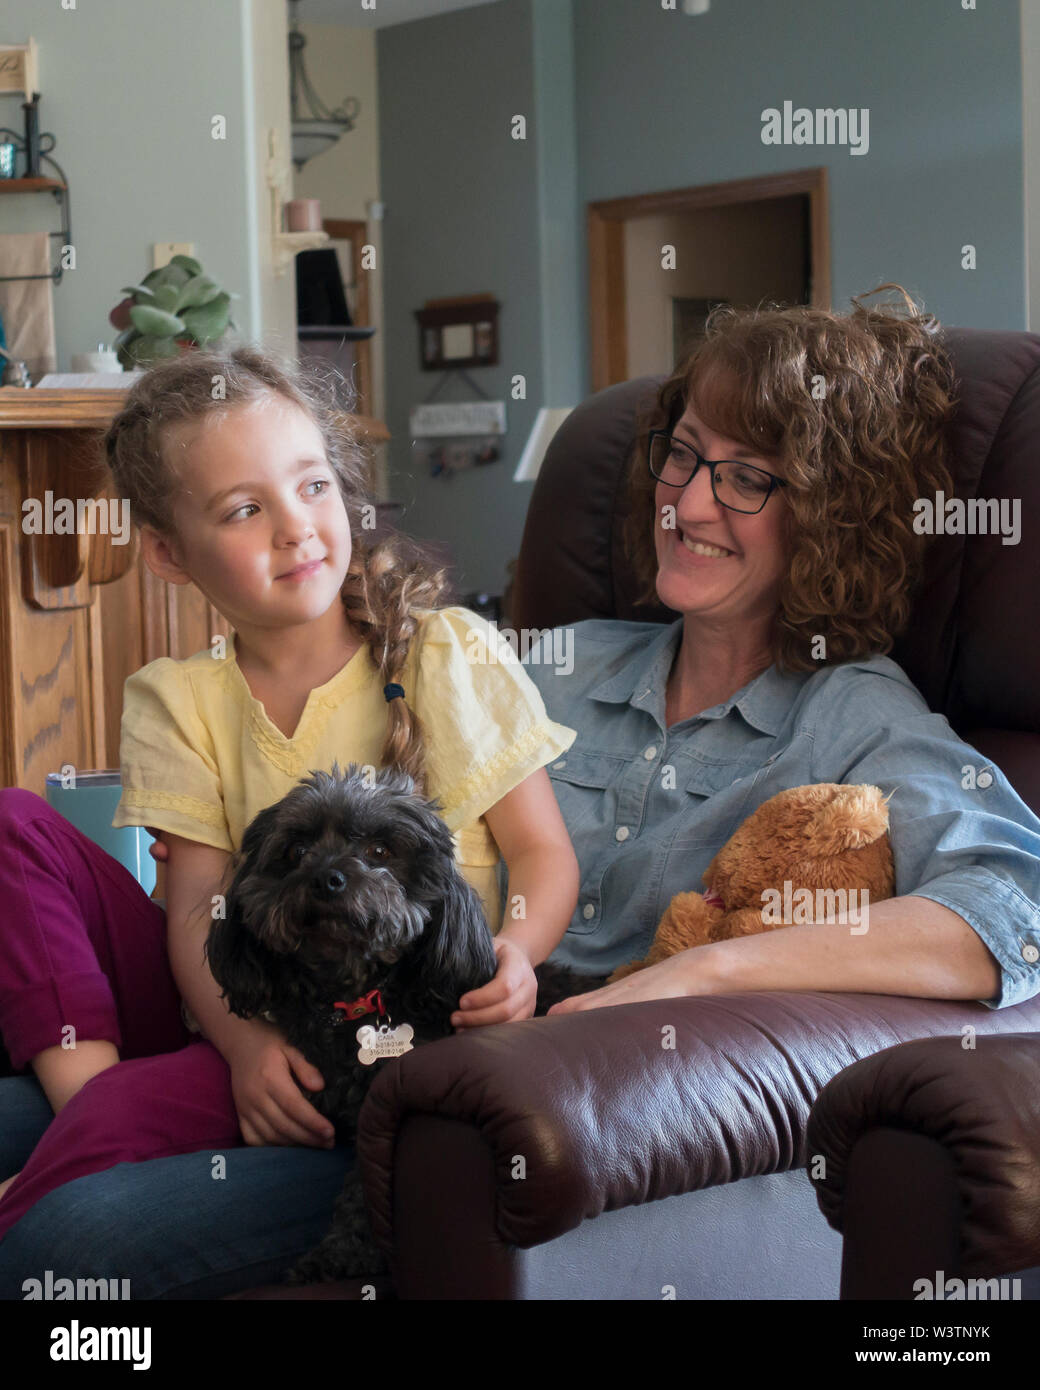 A smiling happy woman holds a five year old girl in her lap while the smiling child has her arms around a dog. Unposed image. USA Stock Photo